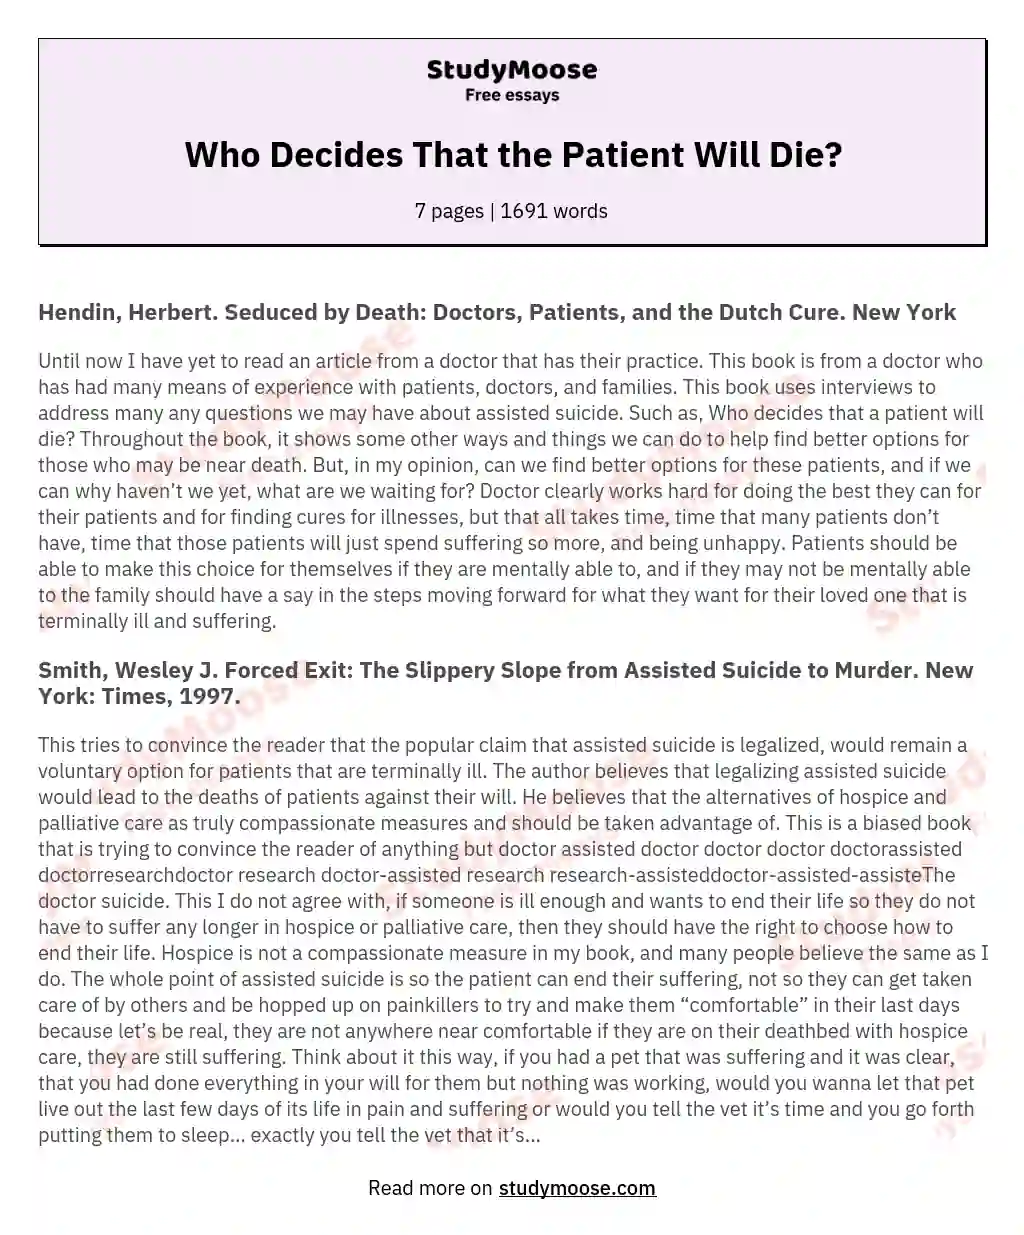 Who Decides That the Patient Will Die? essay